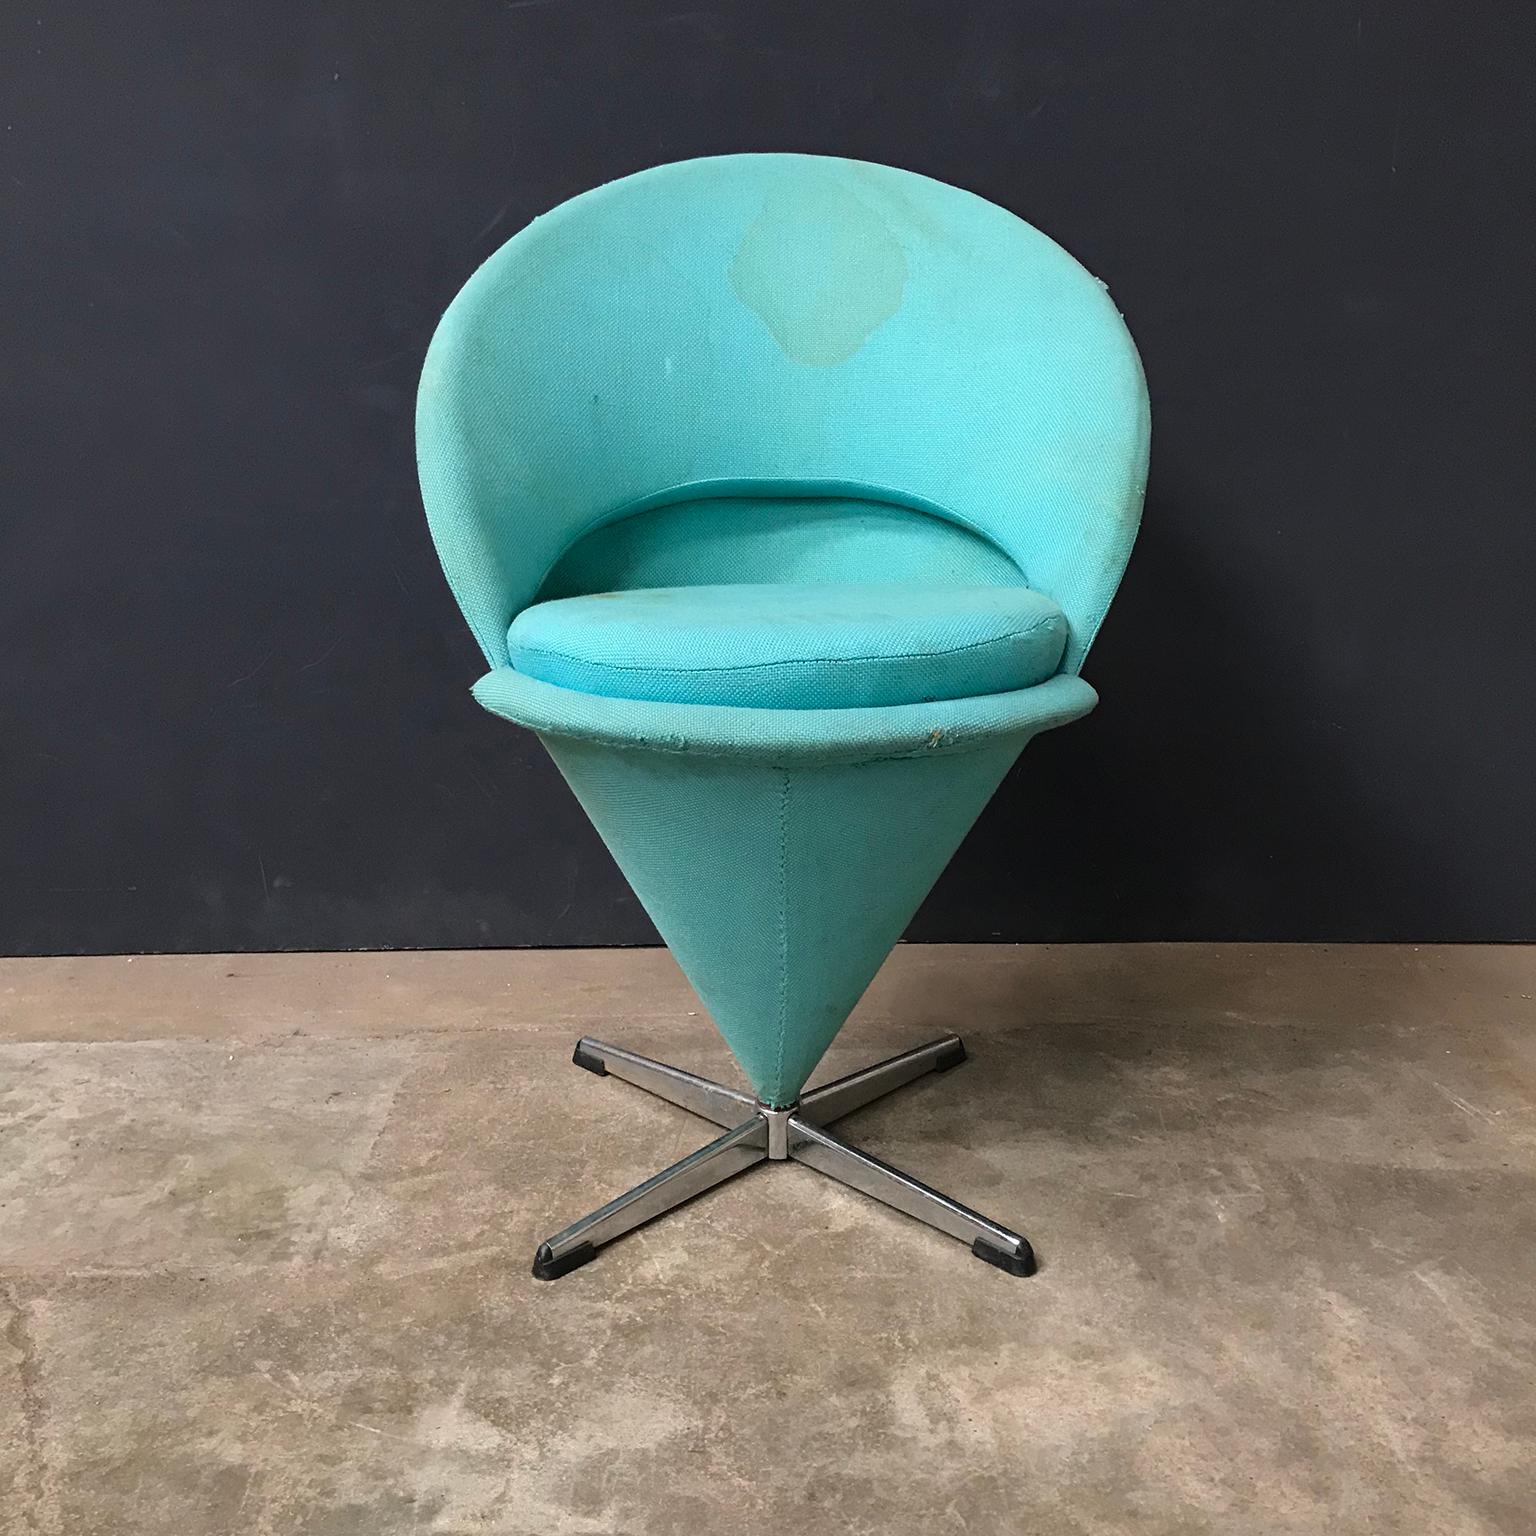 Mid-Century Modern 1958, Verner Panton for Rosenthal, Cone Chair in Original Turquoise Fabric